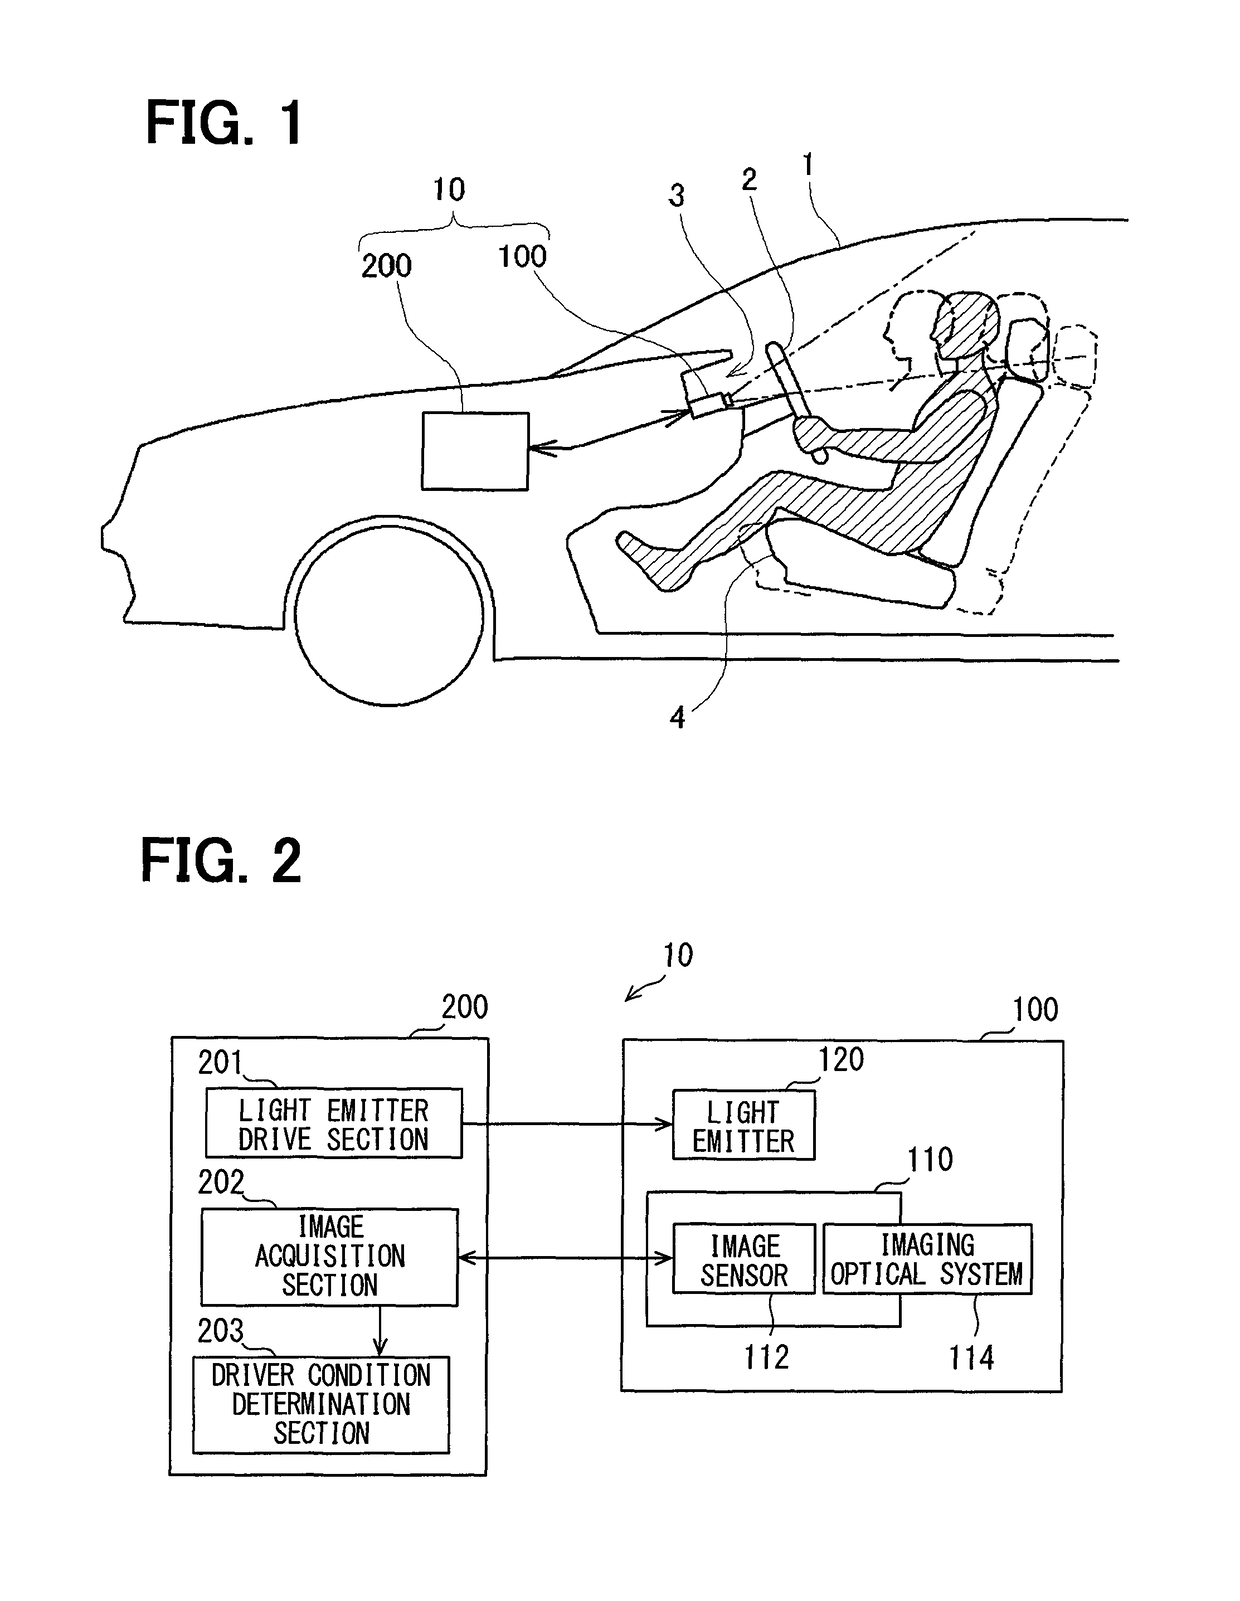 Face image capturing device and driver condition determination device